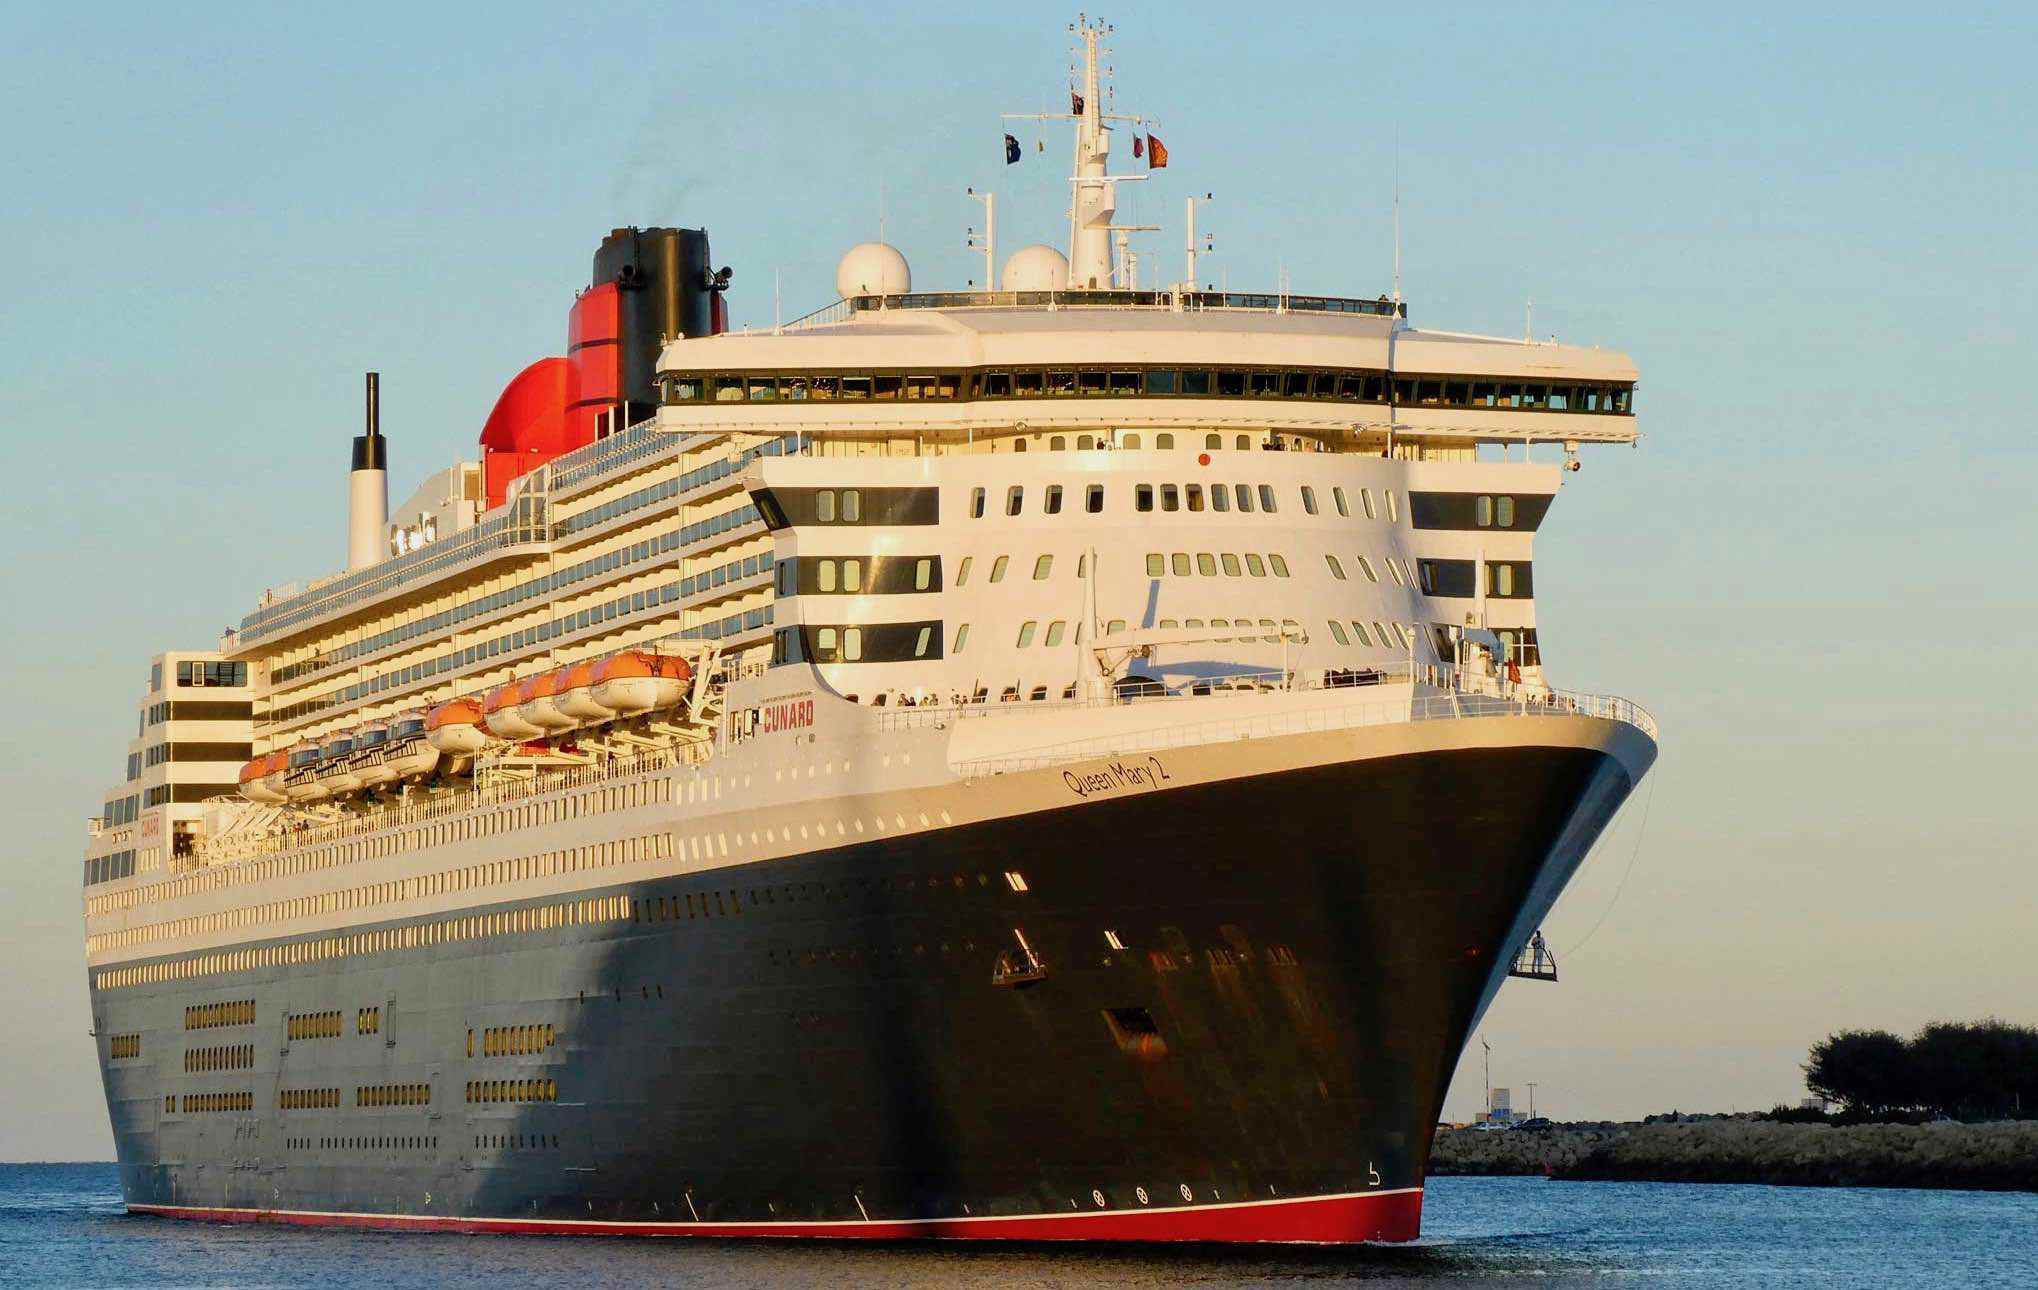 Queen Mary 2 (QM2)